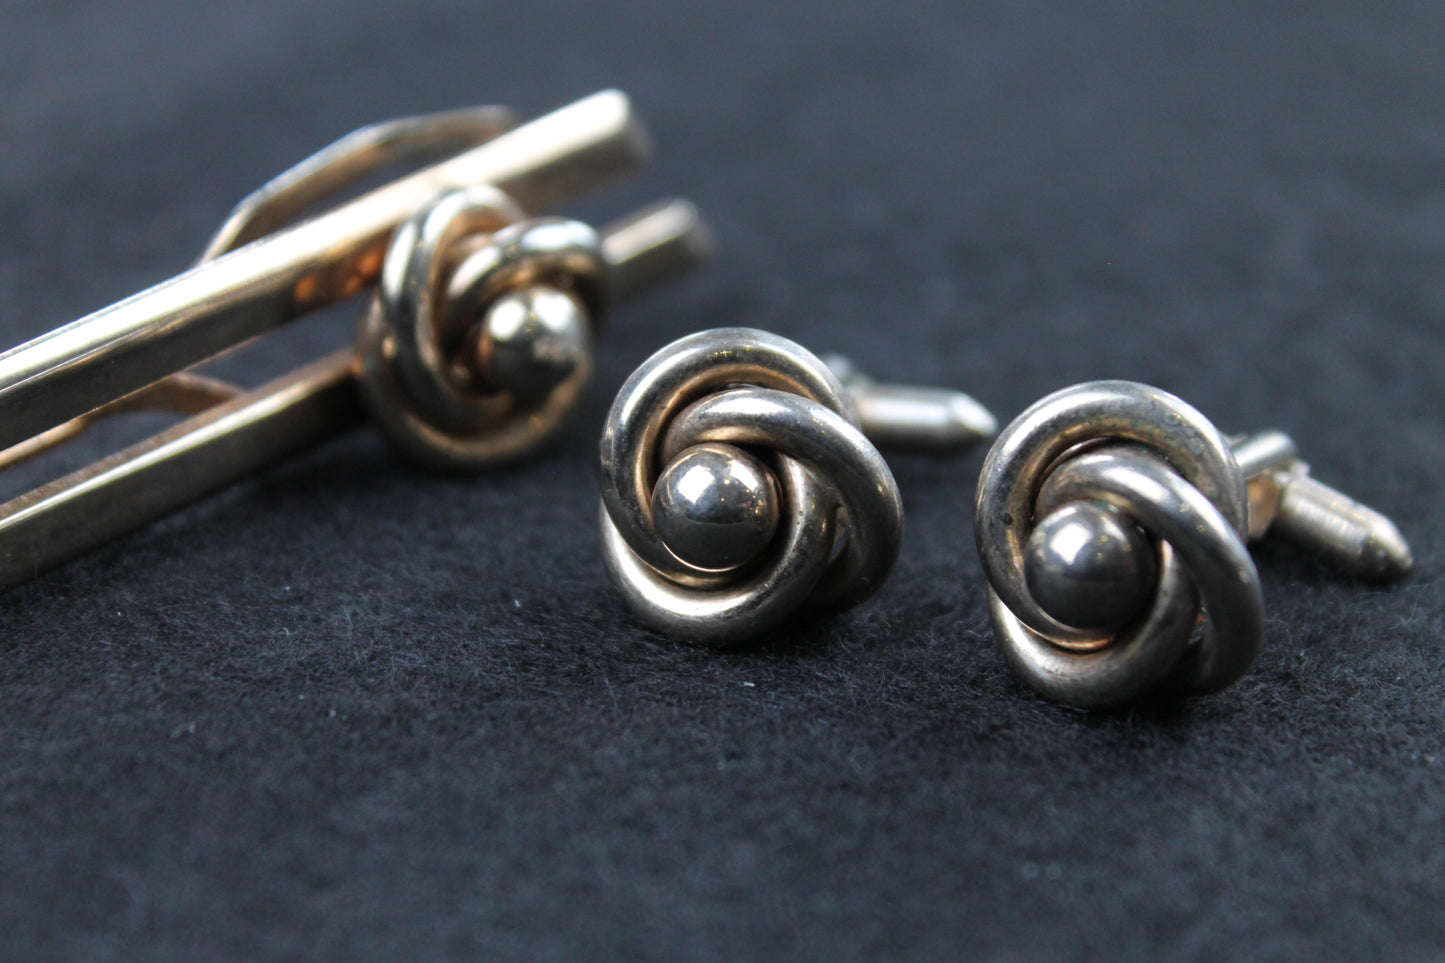 Vintage Knot and Ball Cufflinks and Tie Clip Set